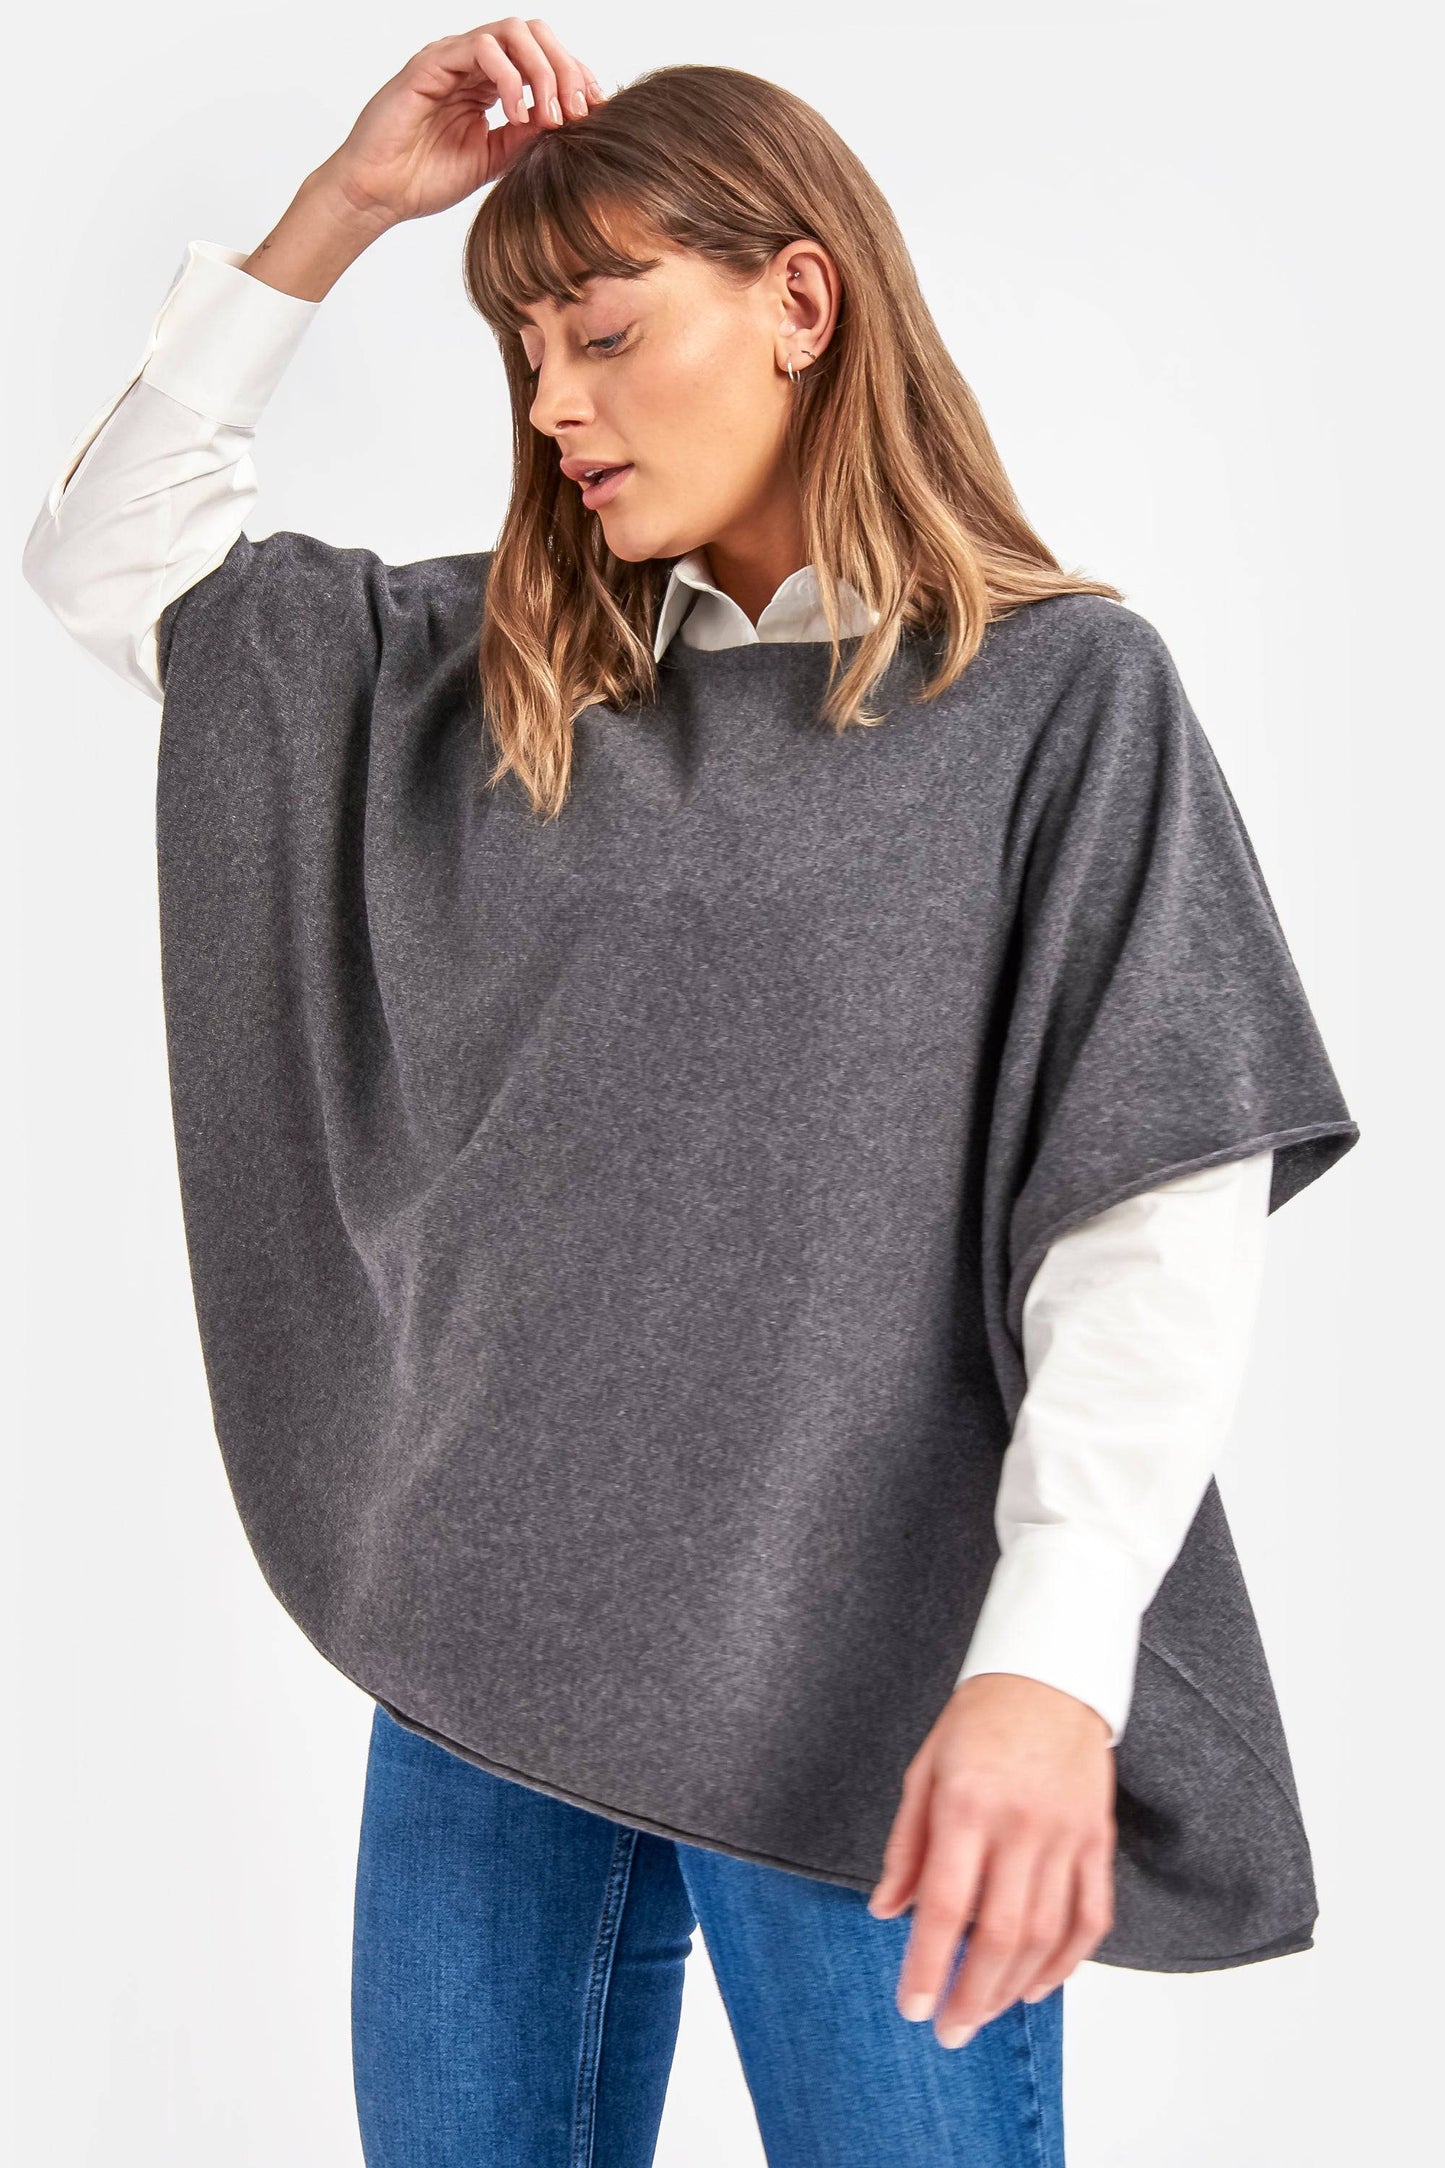 Cashmere & Merino Wool Boat Neck Poncho in Slate Grey By Woodcock & Cavendish for sale - Woodcock and Cavendish